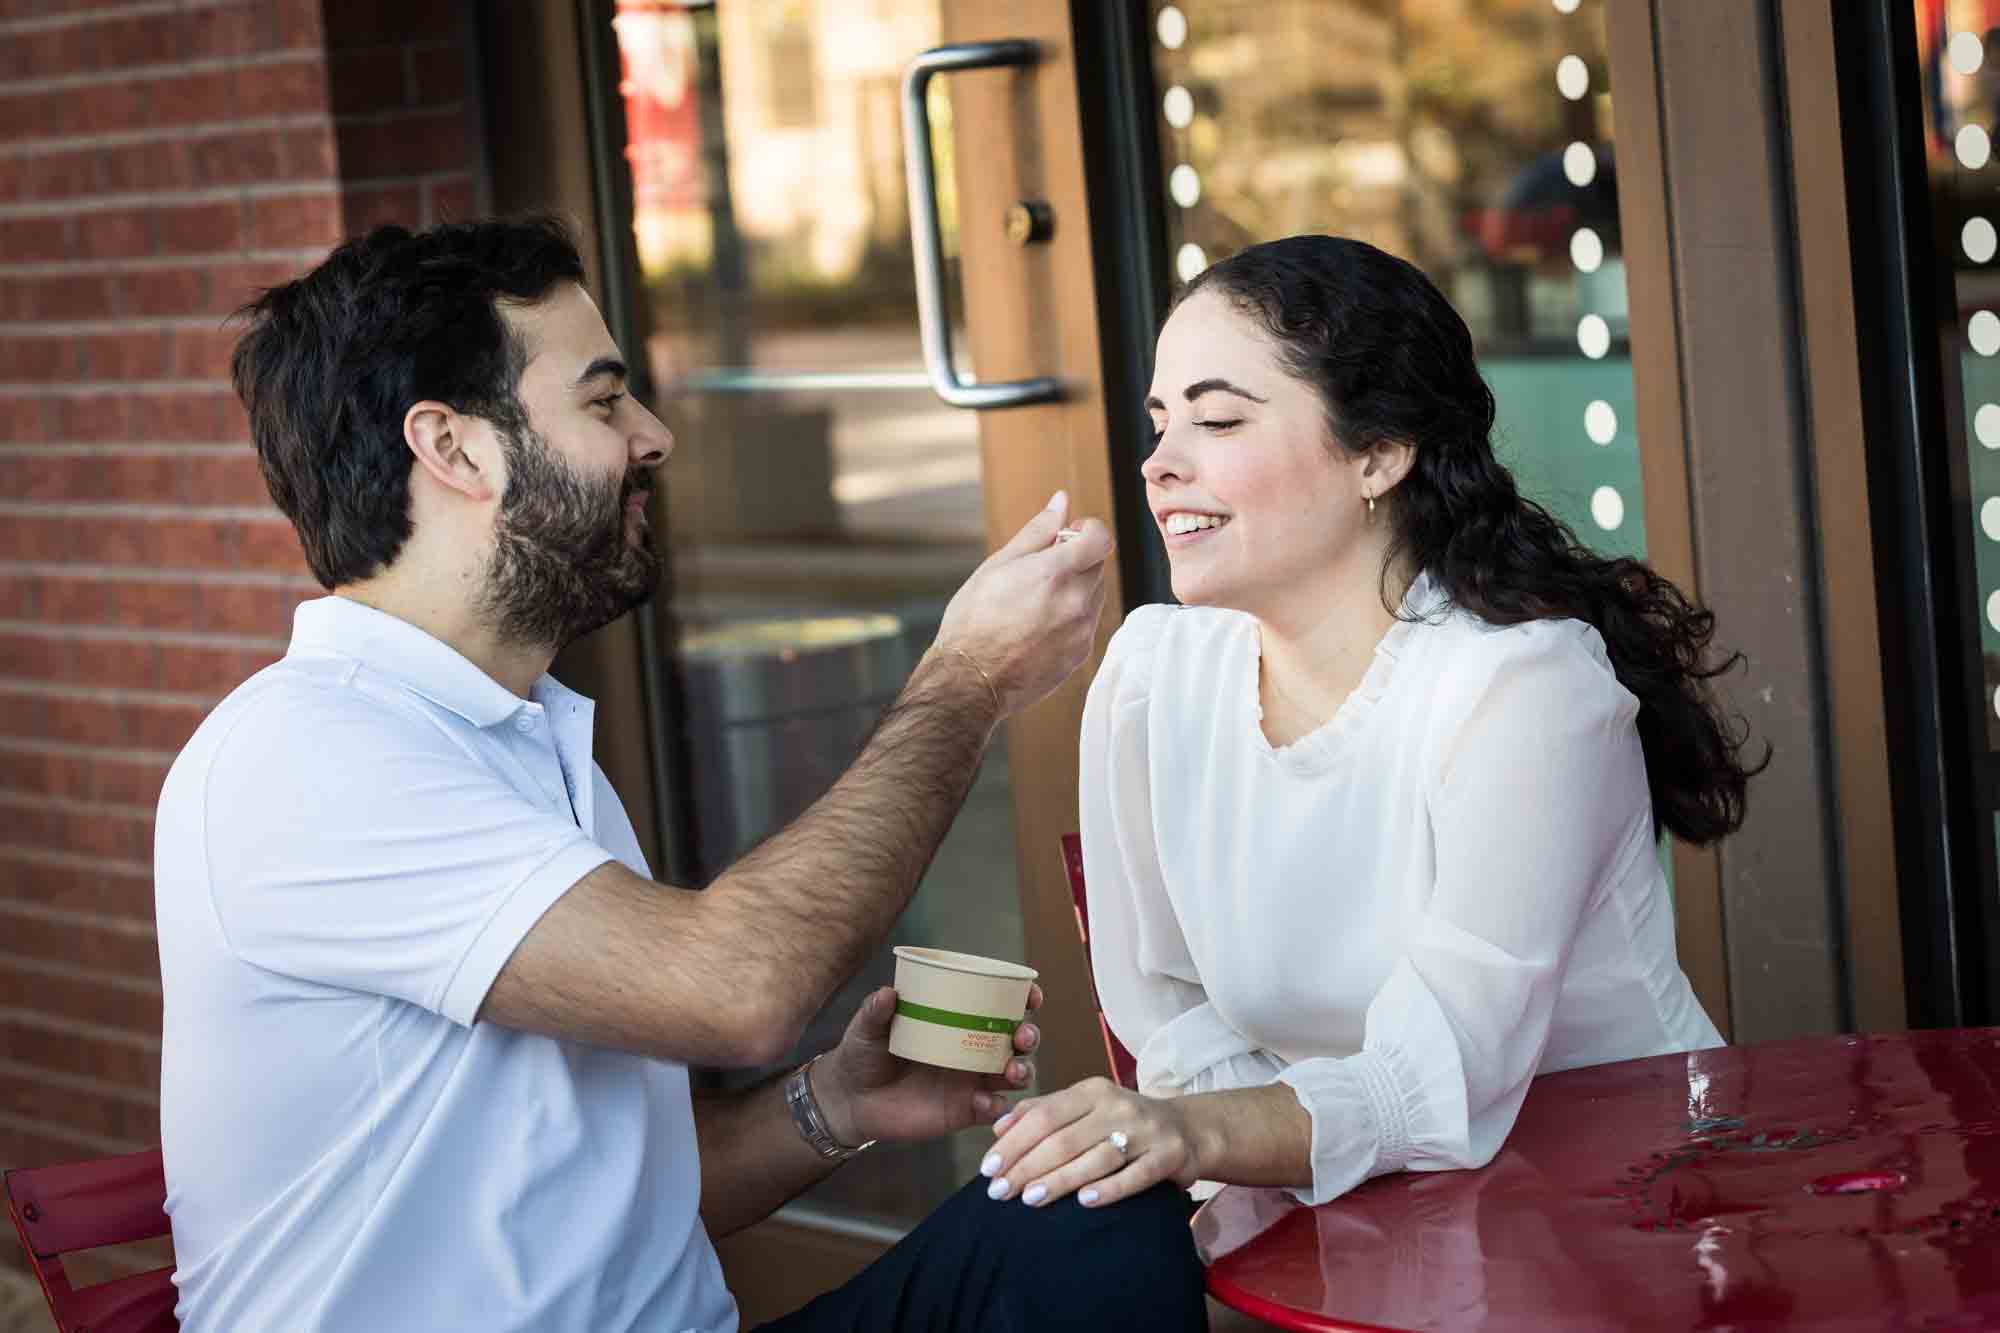 Man feeding woman ice cream at red table during a Pearl engagement portrait session